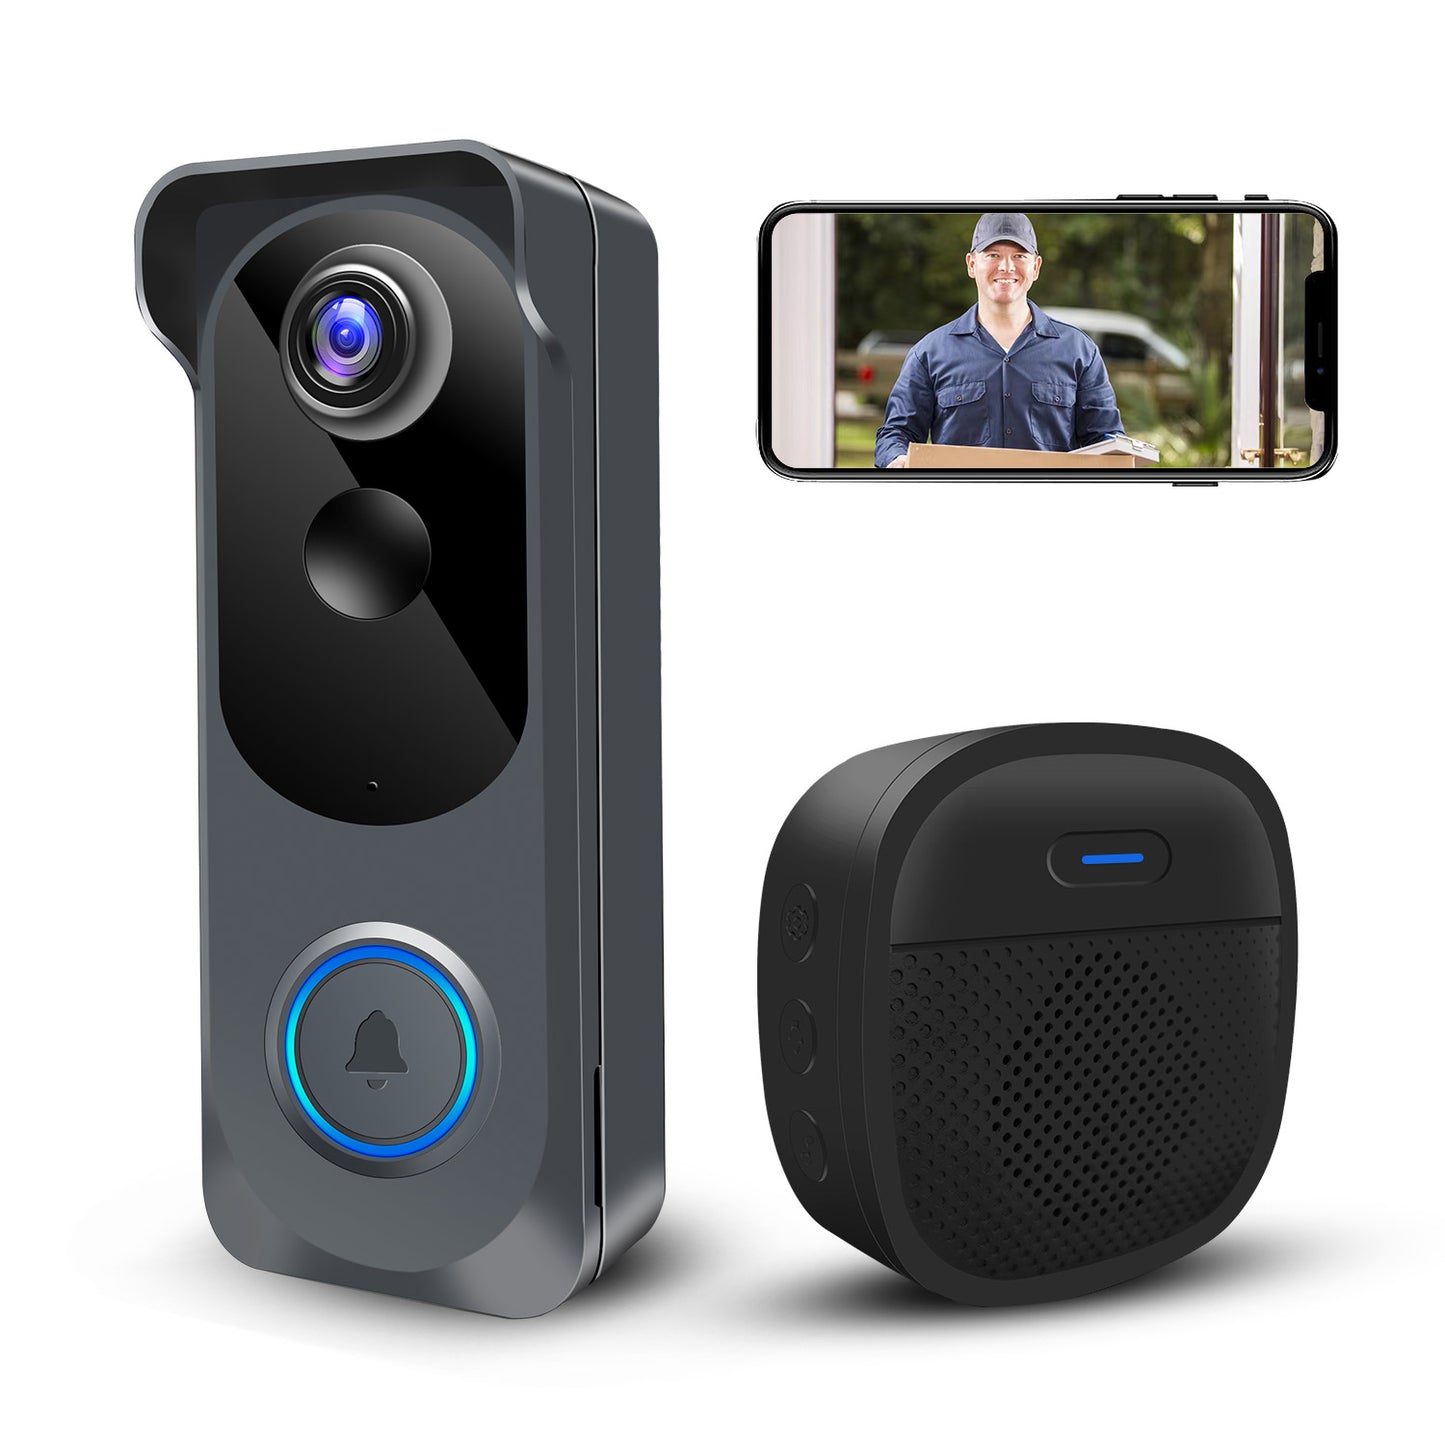 KAMEP Wireless Video Doorbell Camera with Chime, Voice Changer, Voice Message, PIR Motion Detection, Instant Alerts, 2-Way Audio, 1080P HD, Night Vision, 2.4G WiFi, IP66, Battery Powered, Works with Alexa